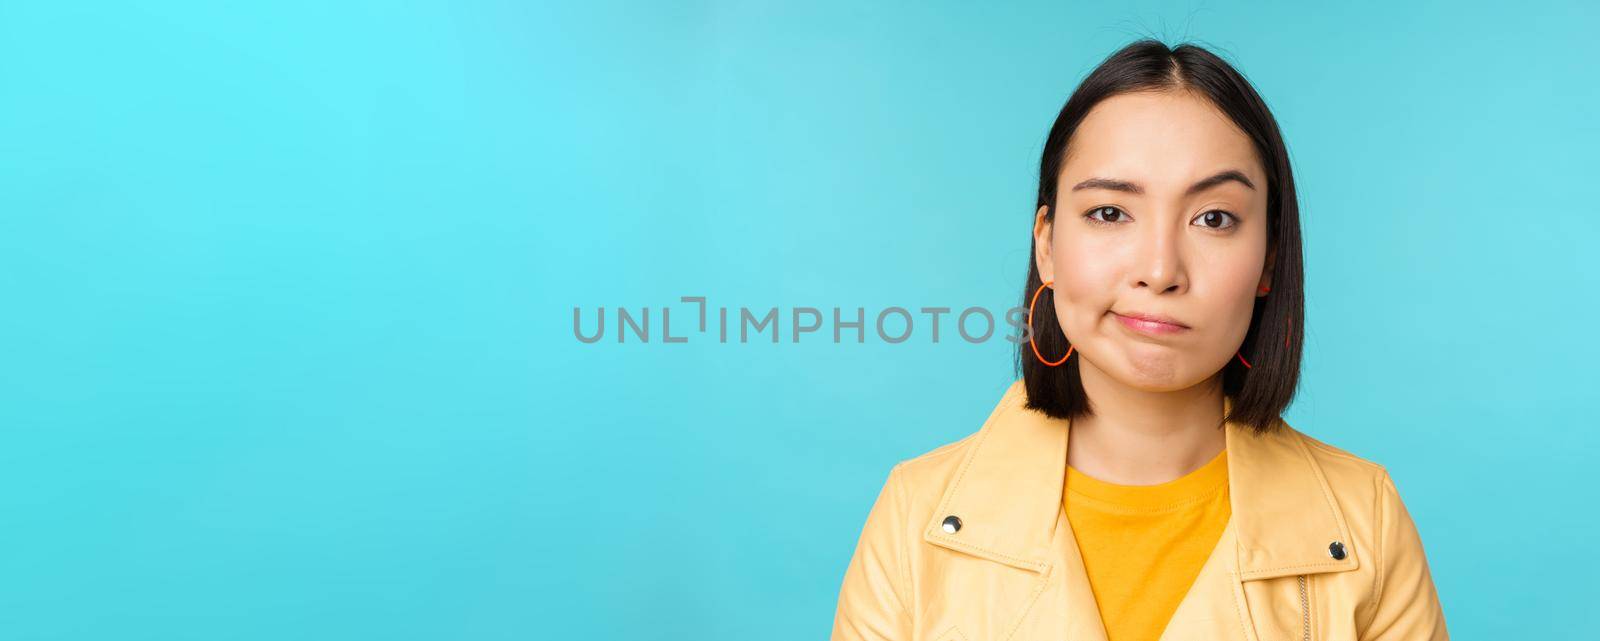 Close up of skeptical asian girl looking disappointed, staring with doubt or disbelief, grimacing at camera, standing over blue background.